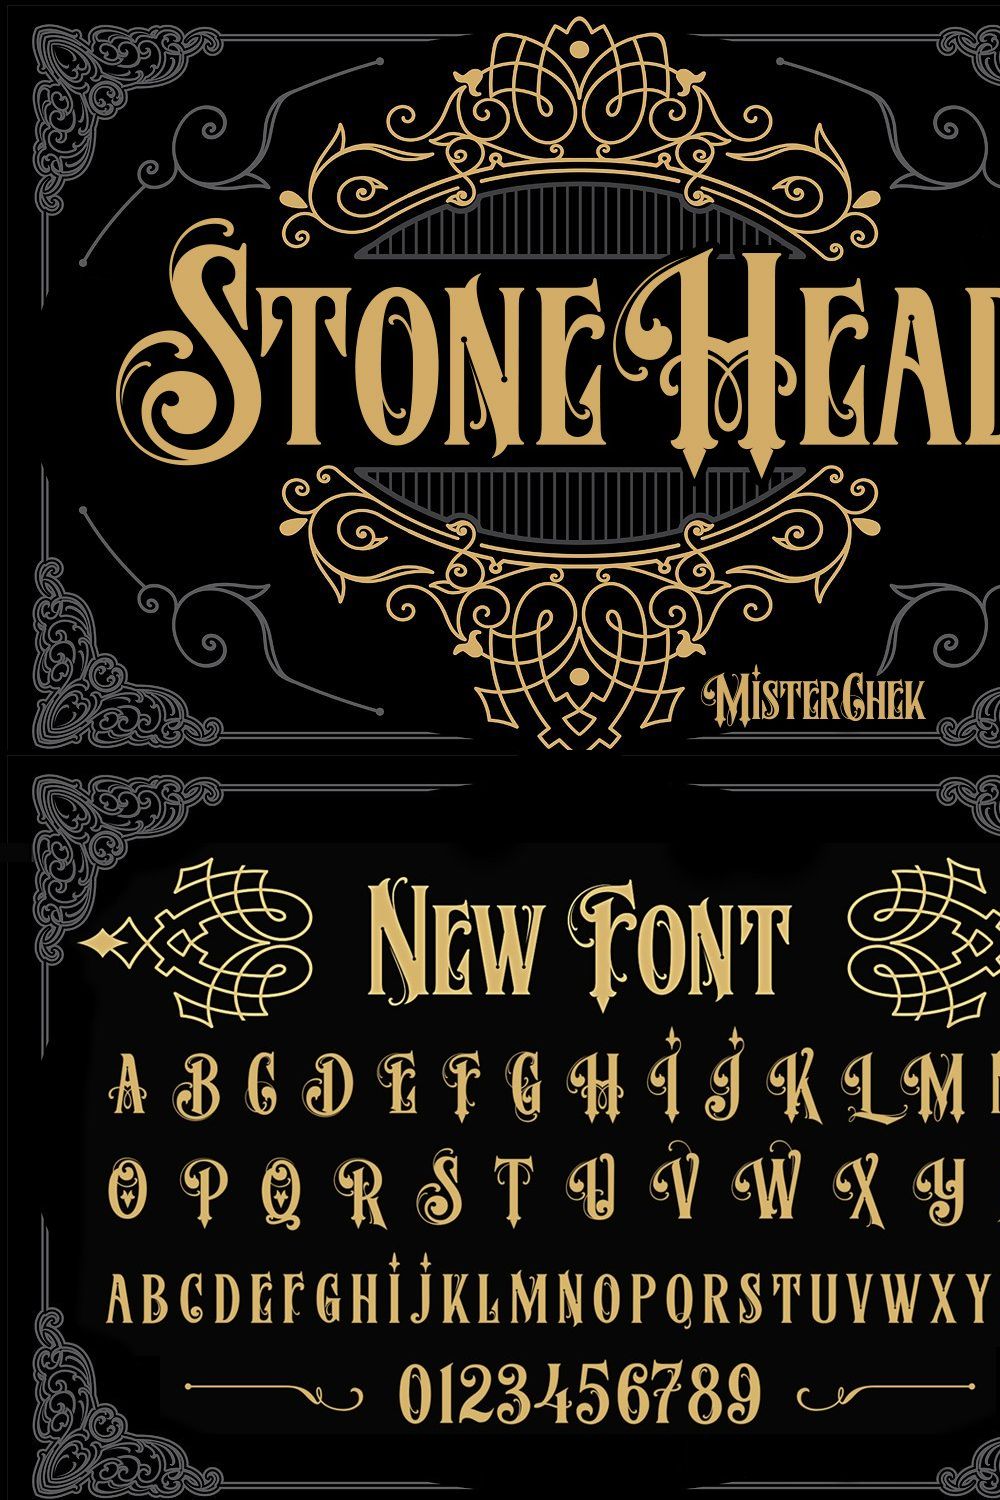 Stone Head pinterest preview image.